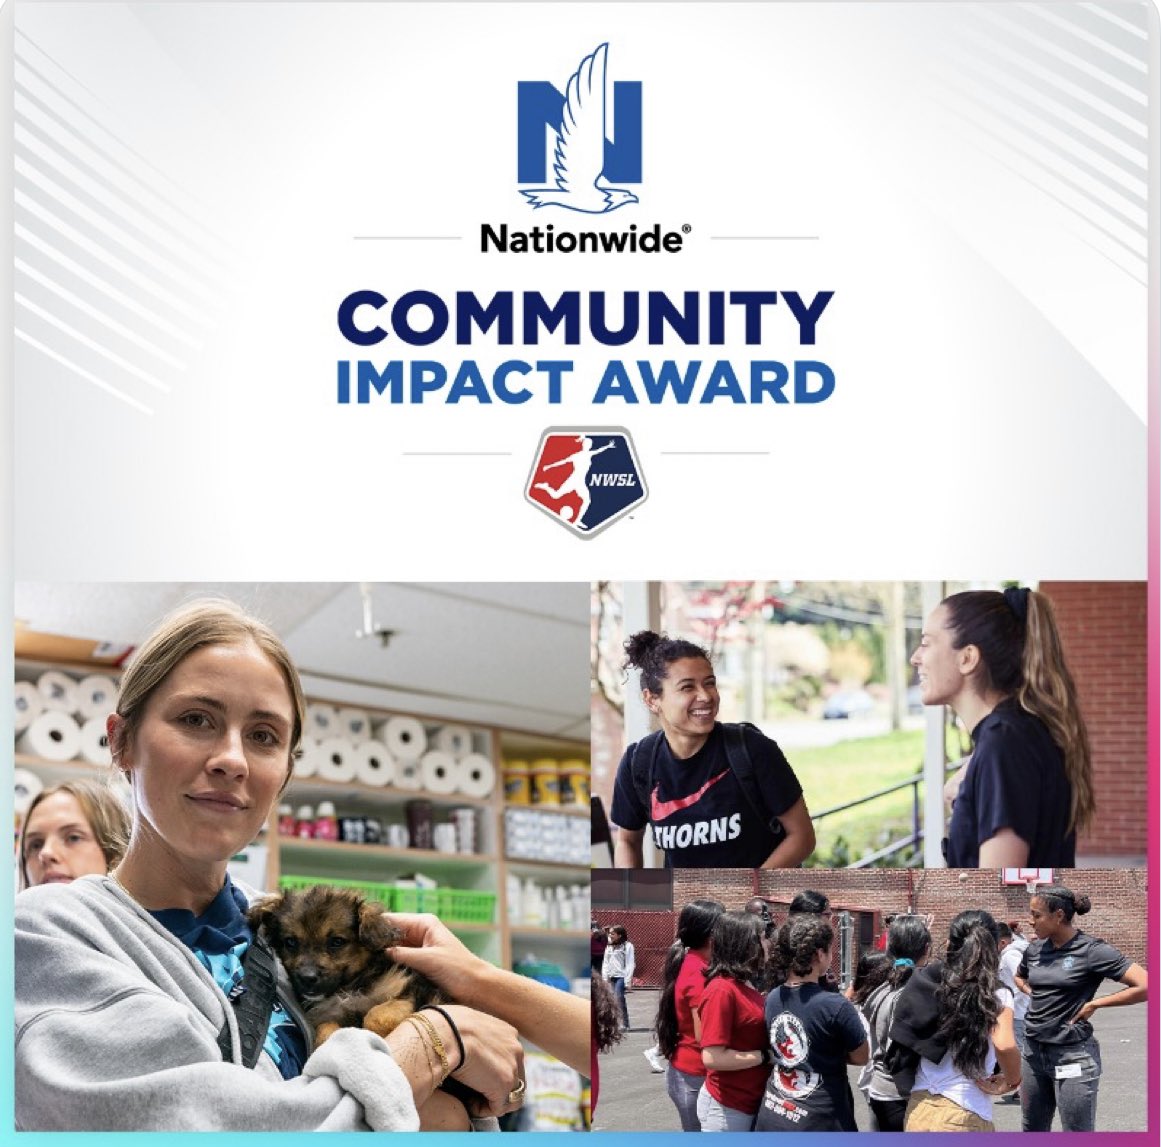 Proud of the #ECNLAlum representing their respective clubs as they’ve been nominated for the @Nationwide Community Impact Award! Shout out to Jaelin Howell, Diana Ordóñez, Ella Stevens, Phallon Tullis-Joyce, Tara McKeown, Abby Smith and Brianna Pinto! #LeadersPlayHere…